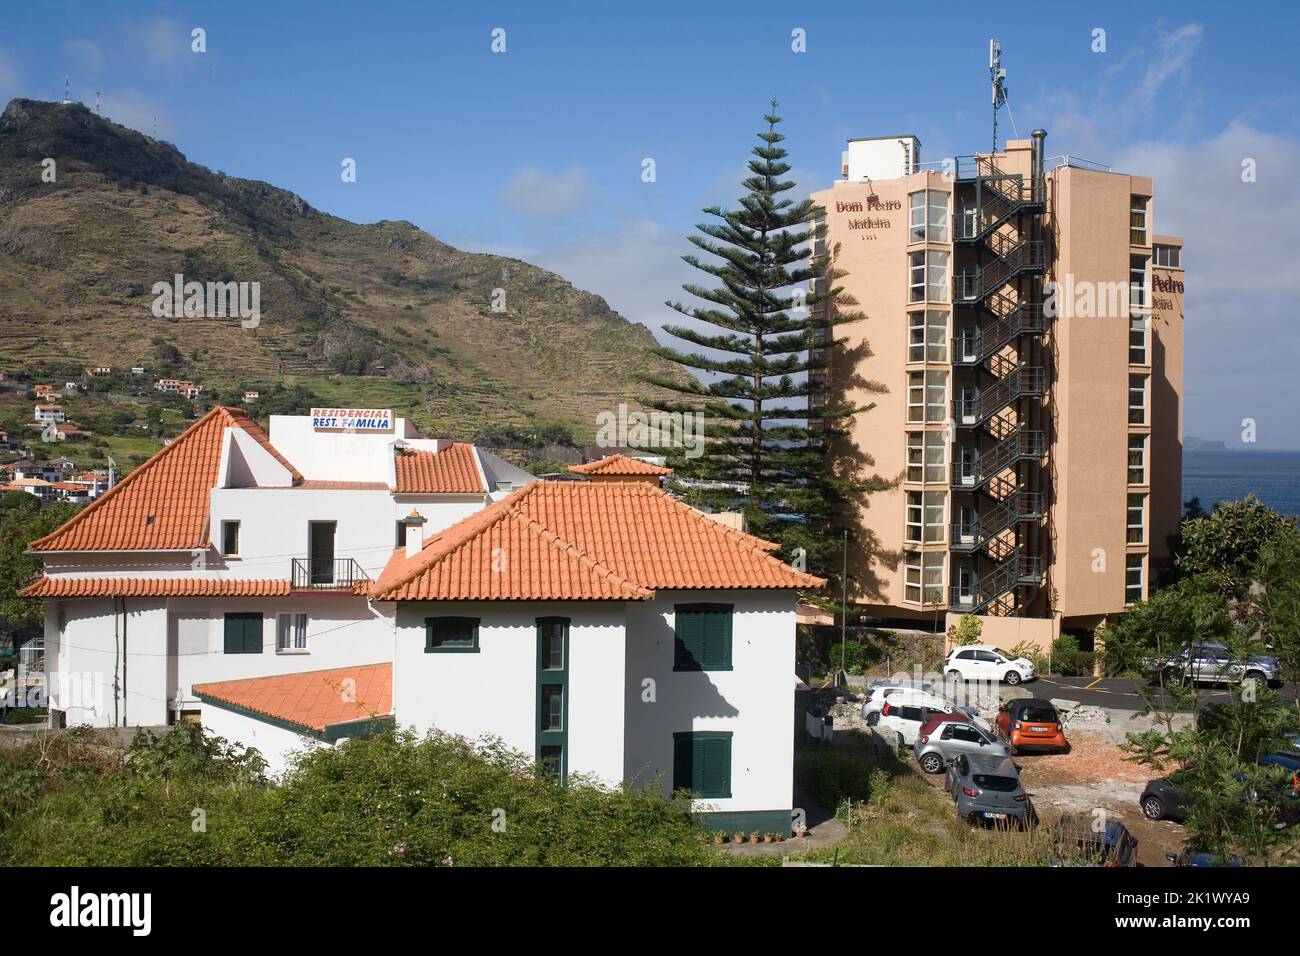 Dom Pedro Madeira hotel tower with a more traditional family hotel next to it in the city of Machico Stock Photo